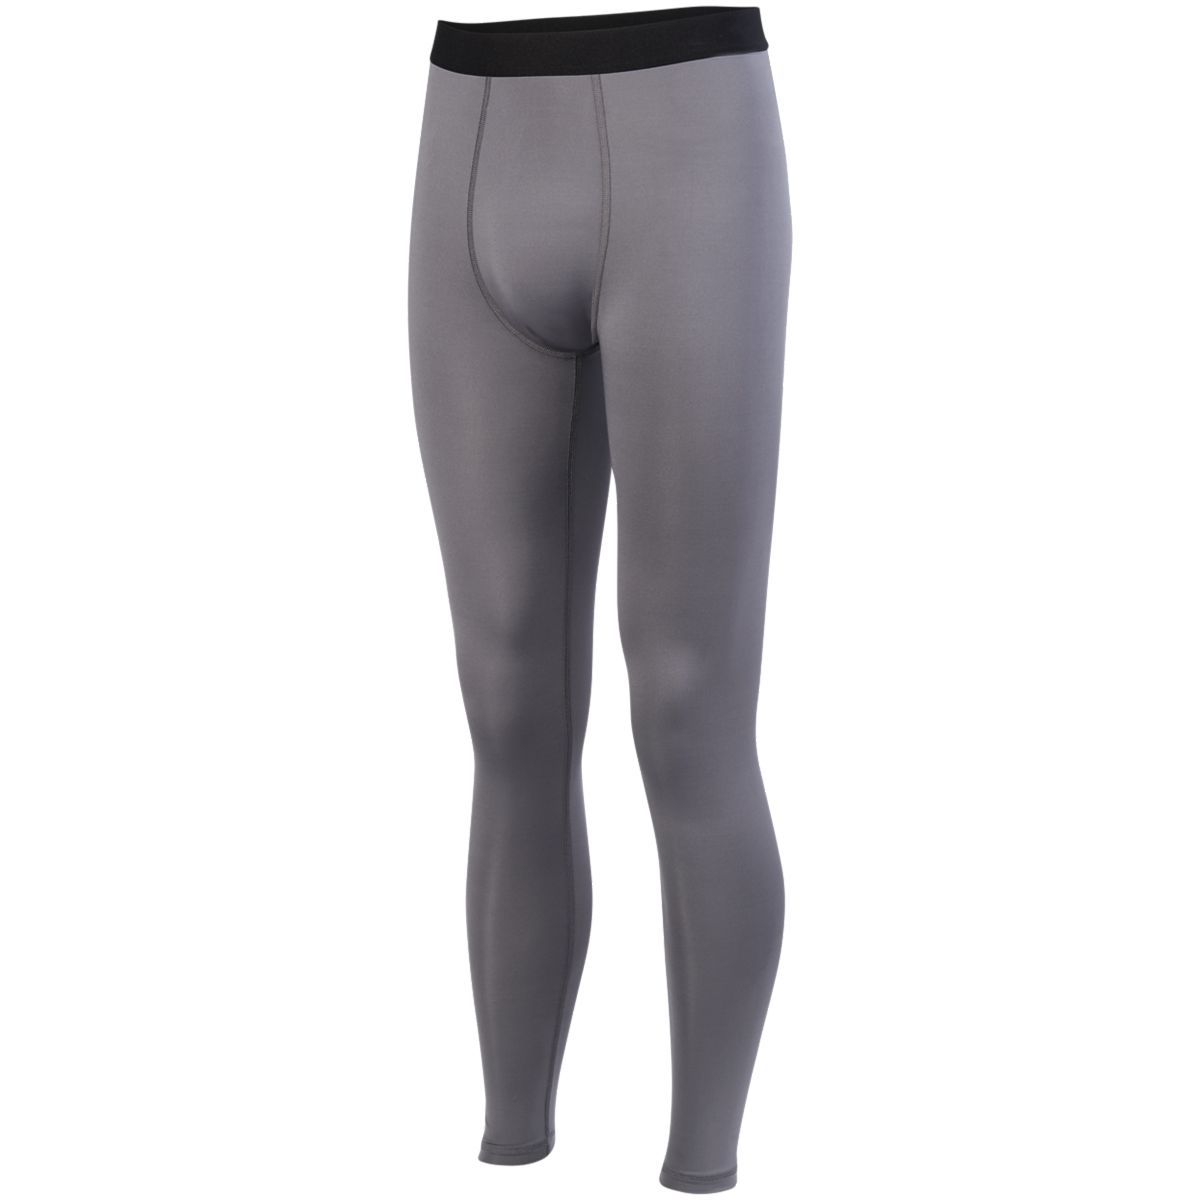 Hyperform Compression Tight - 2620